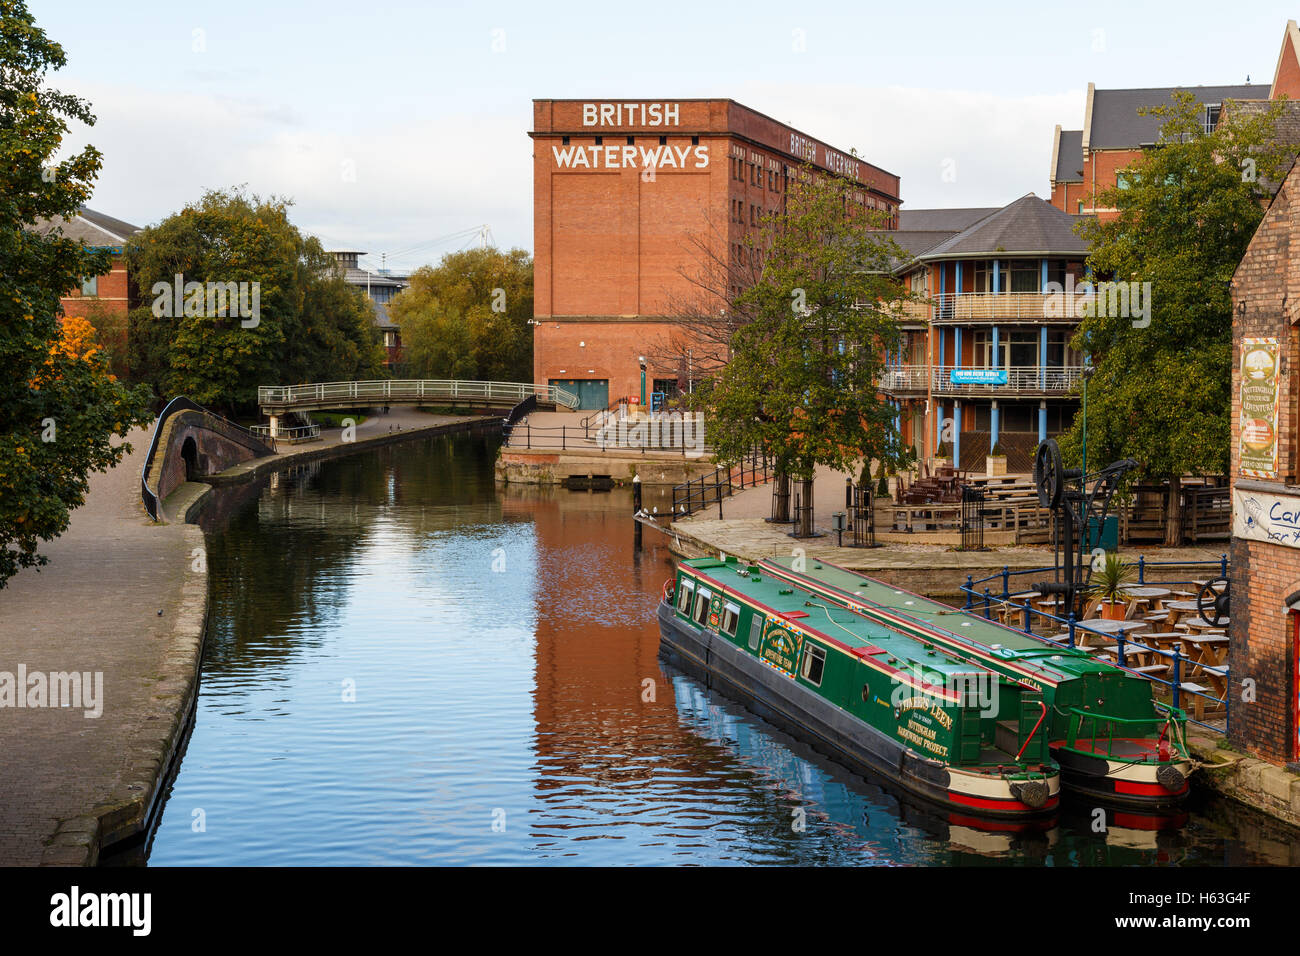 Nottingham canal and British Waterways building. In Nottingham, England. Stock Photo